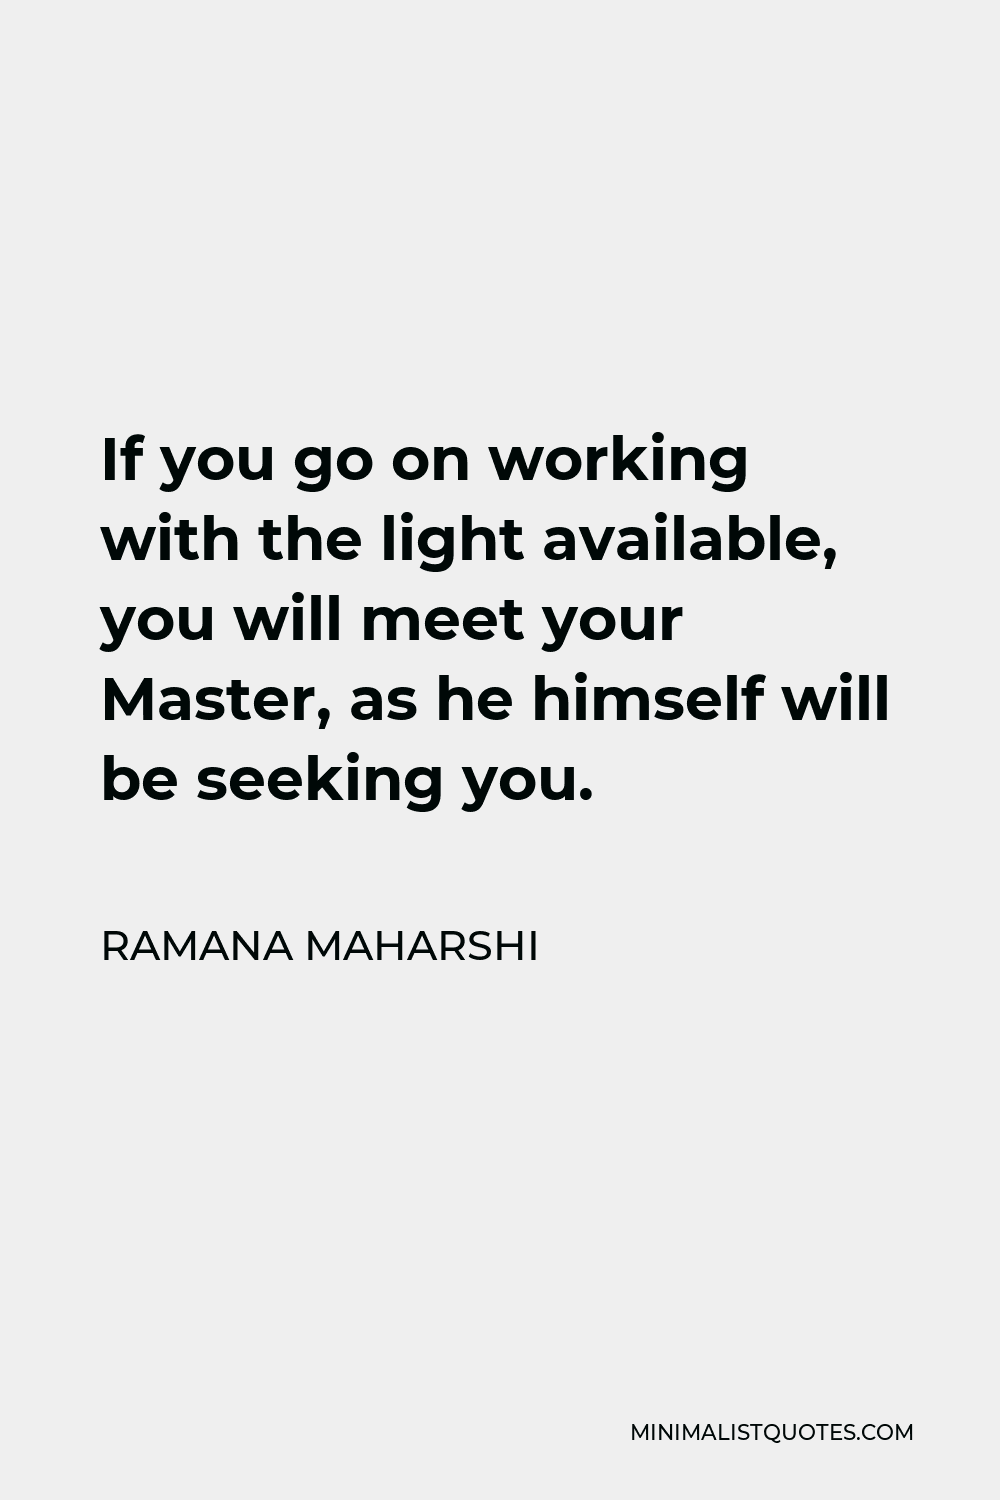 Ramana Maharshi Quote - If you go on working with the light available, you will meet your Master, as he himself will be seeking you.